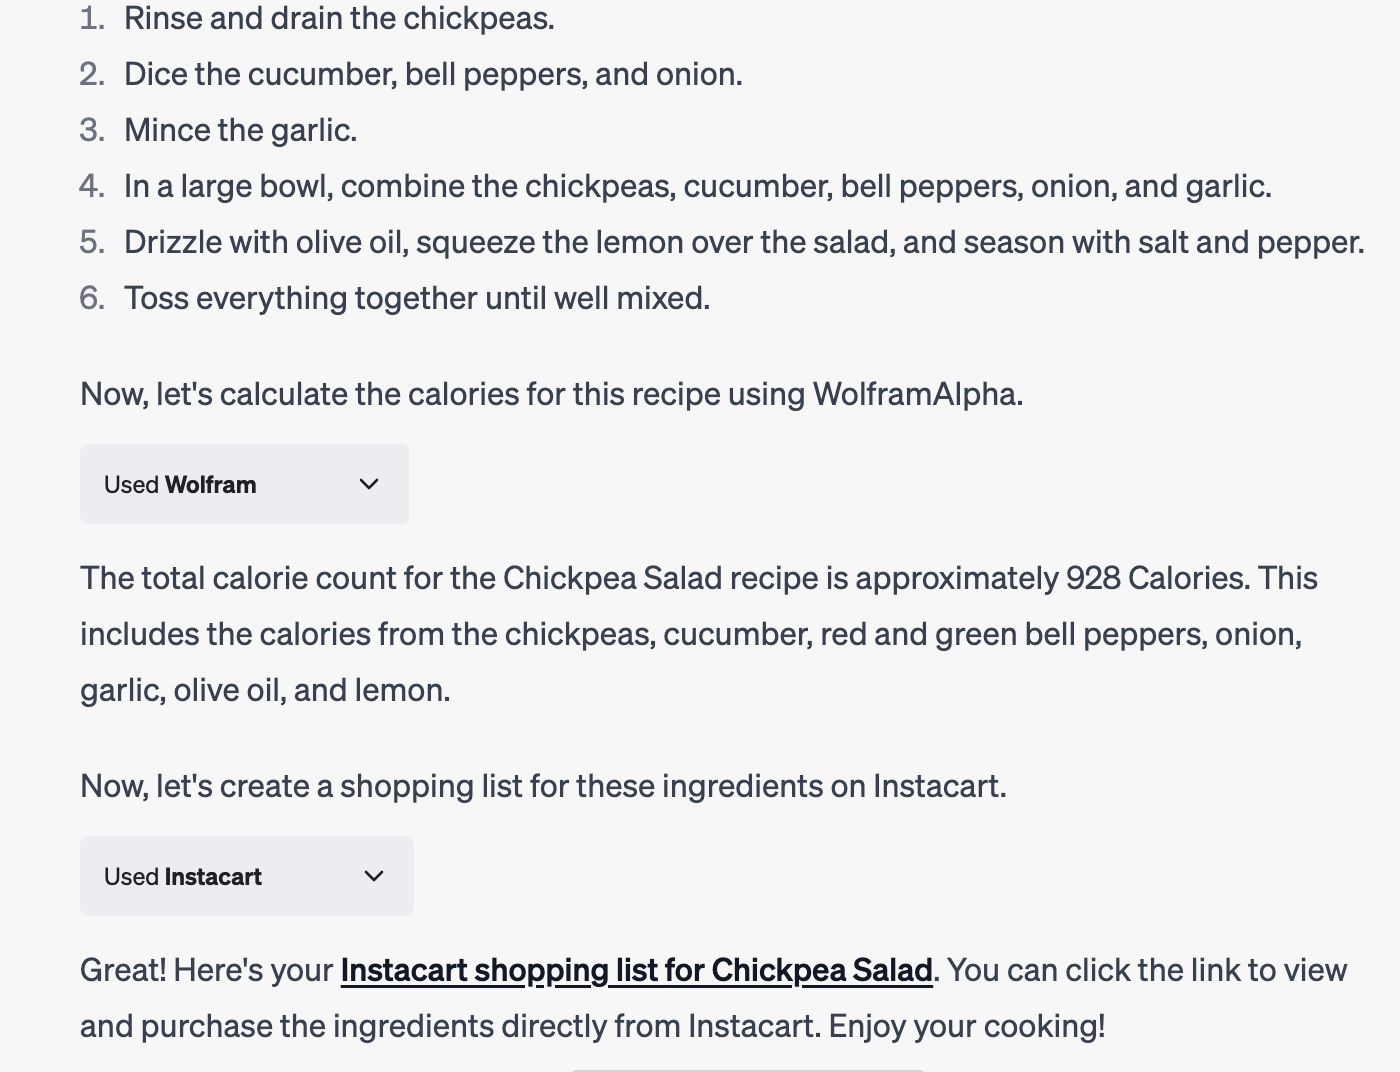 Using the Wolfram and Instacart plugins on ChatGPT